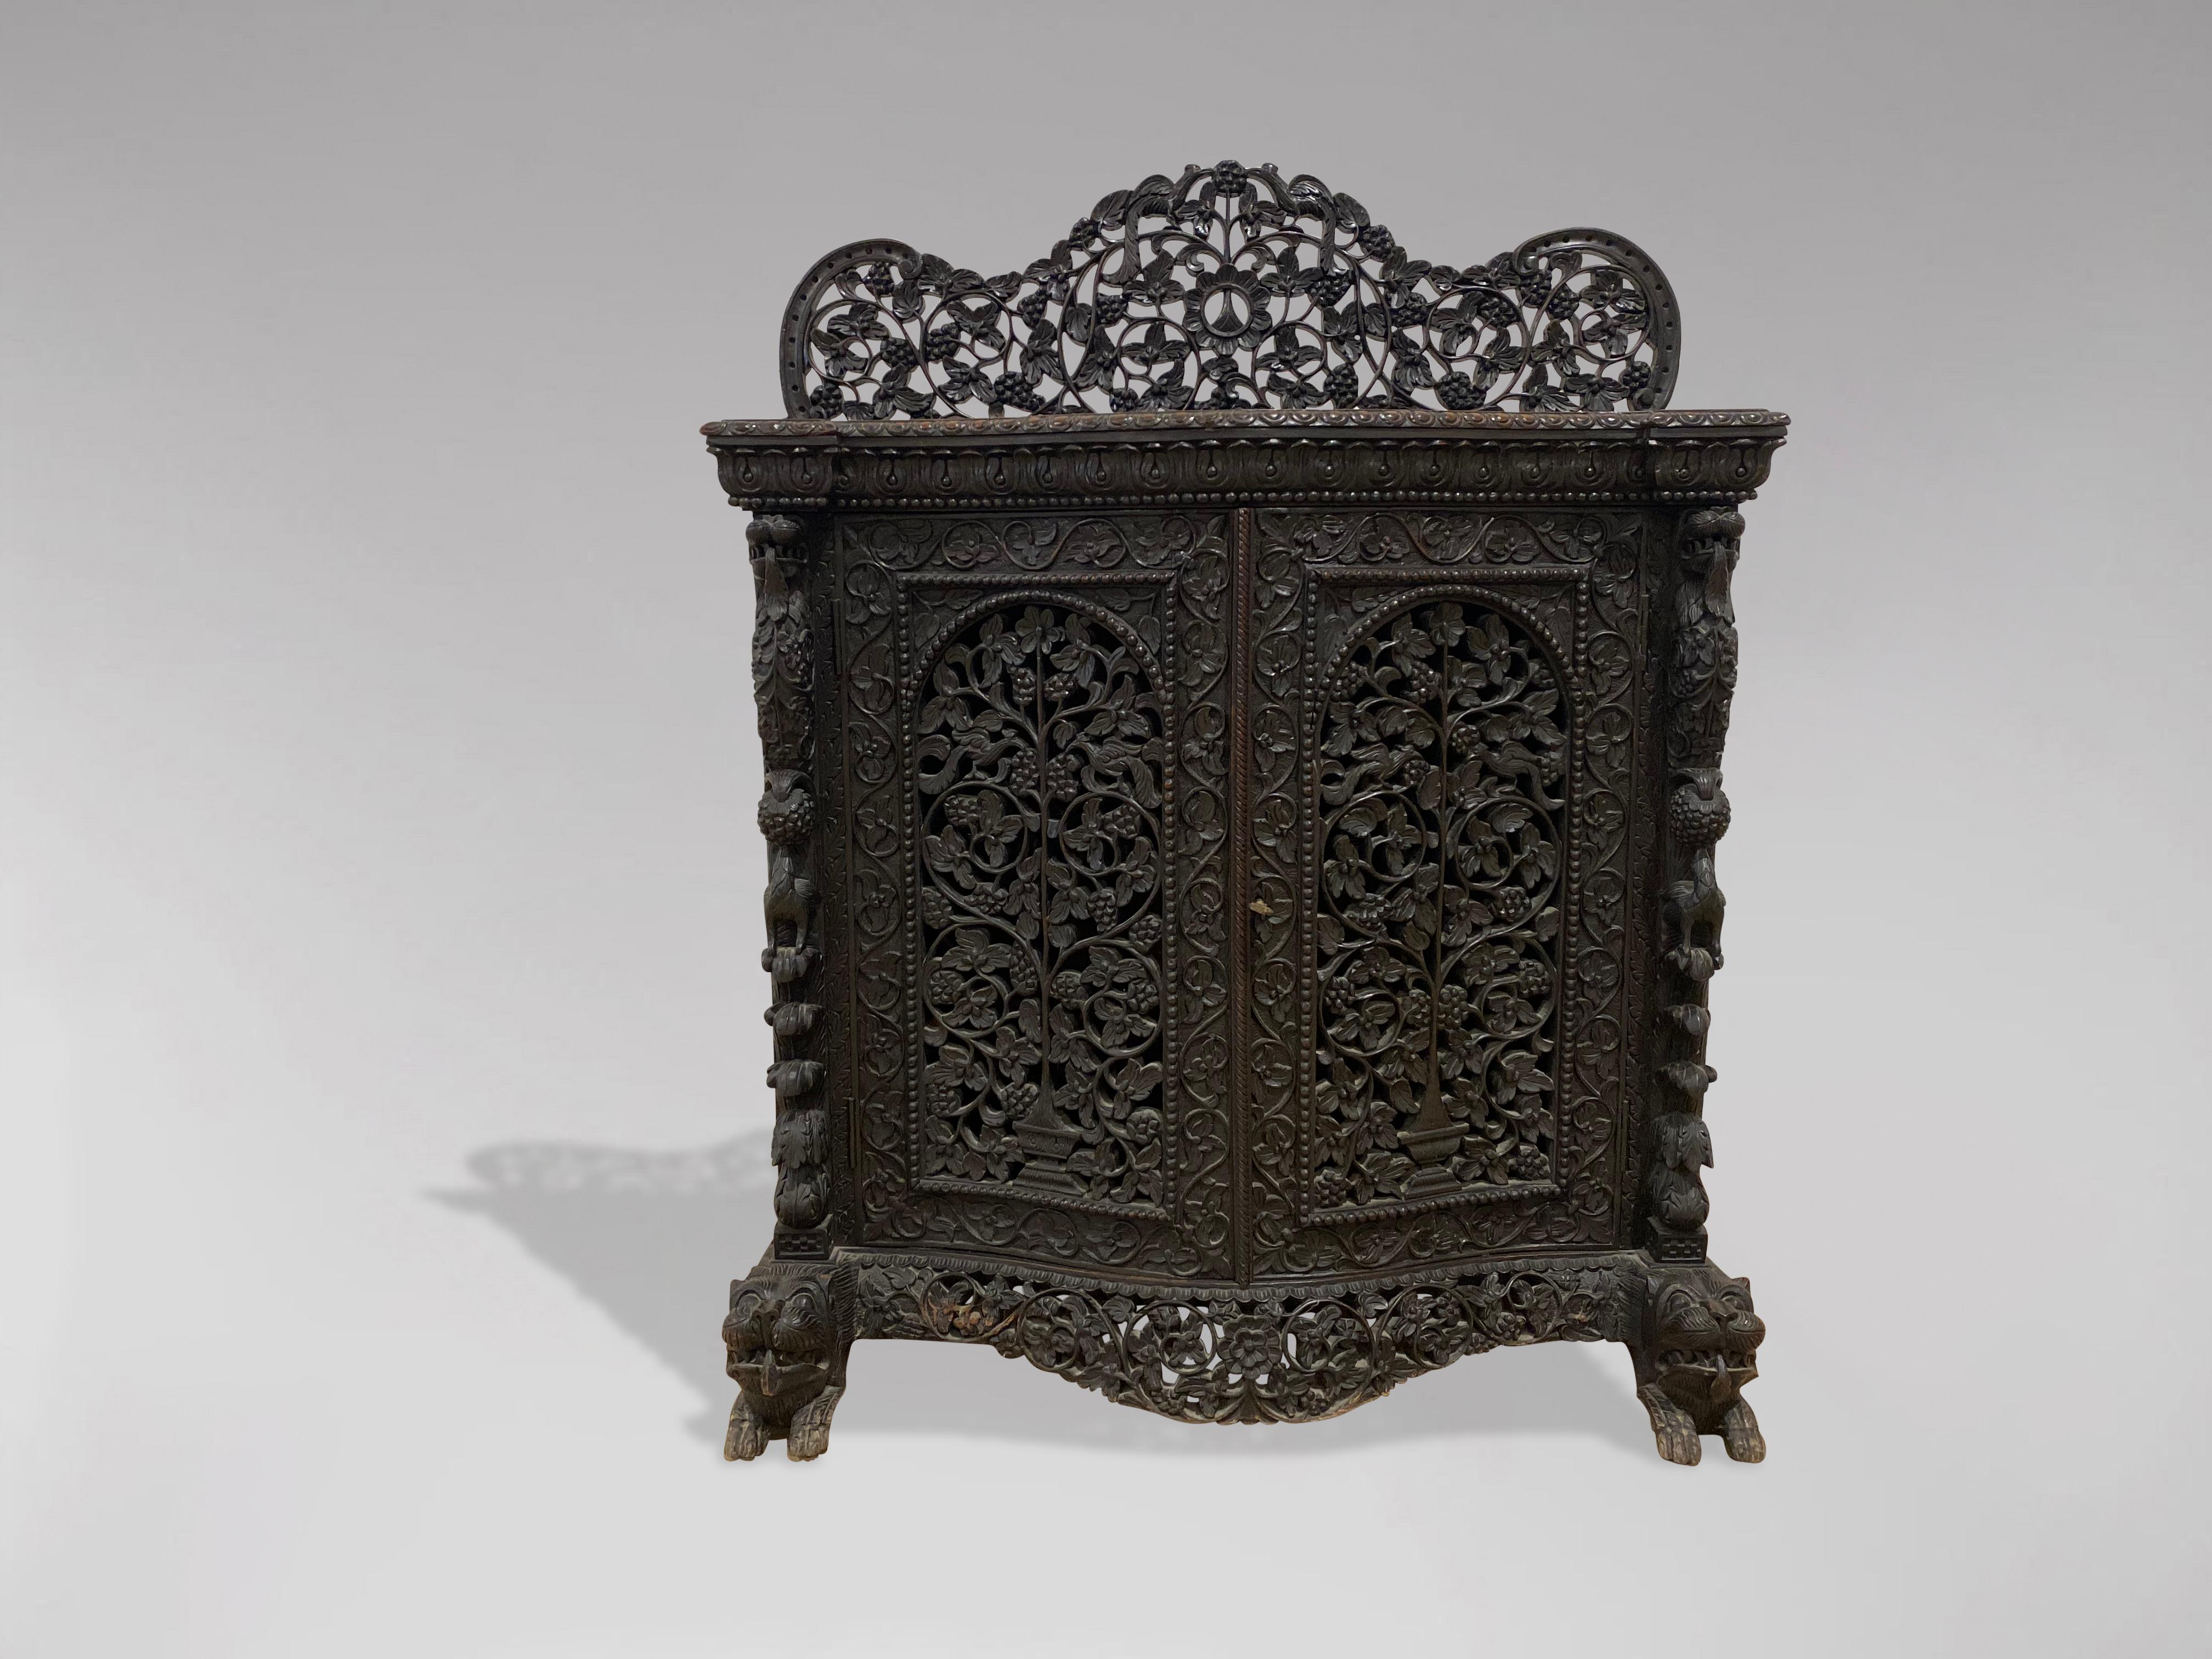 A mid 19th century, Victorian period, British colonial, Anglo-Indian carved and pierced serpentine sideboard with pierced gallery in solid rosewood. The front is mounted with two hinged doors with shaped panelled doors enclosing one long shelf. All